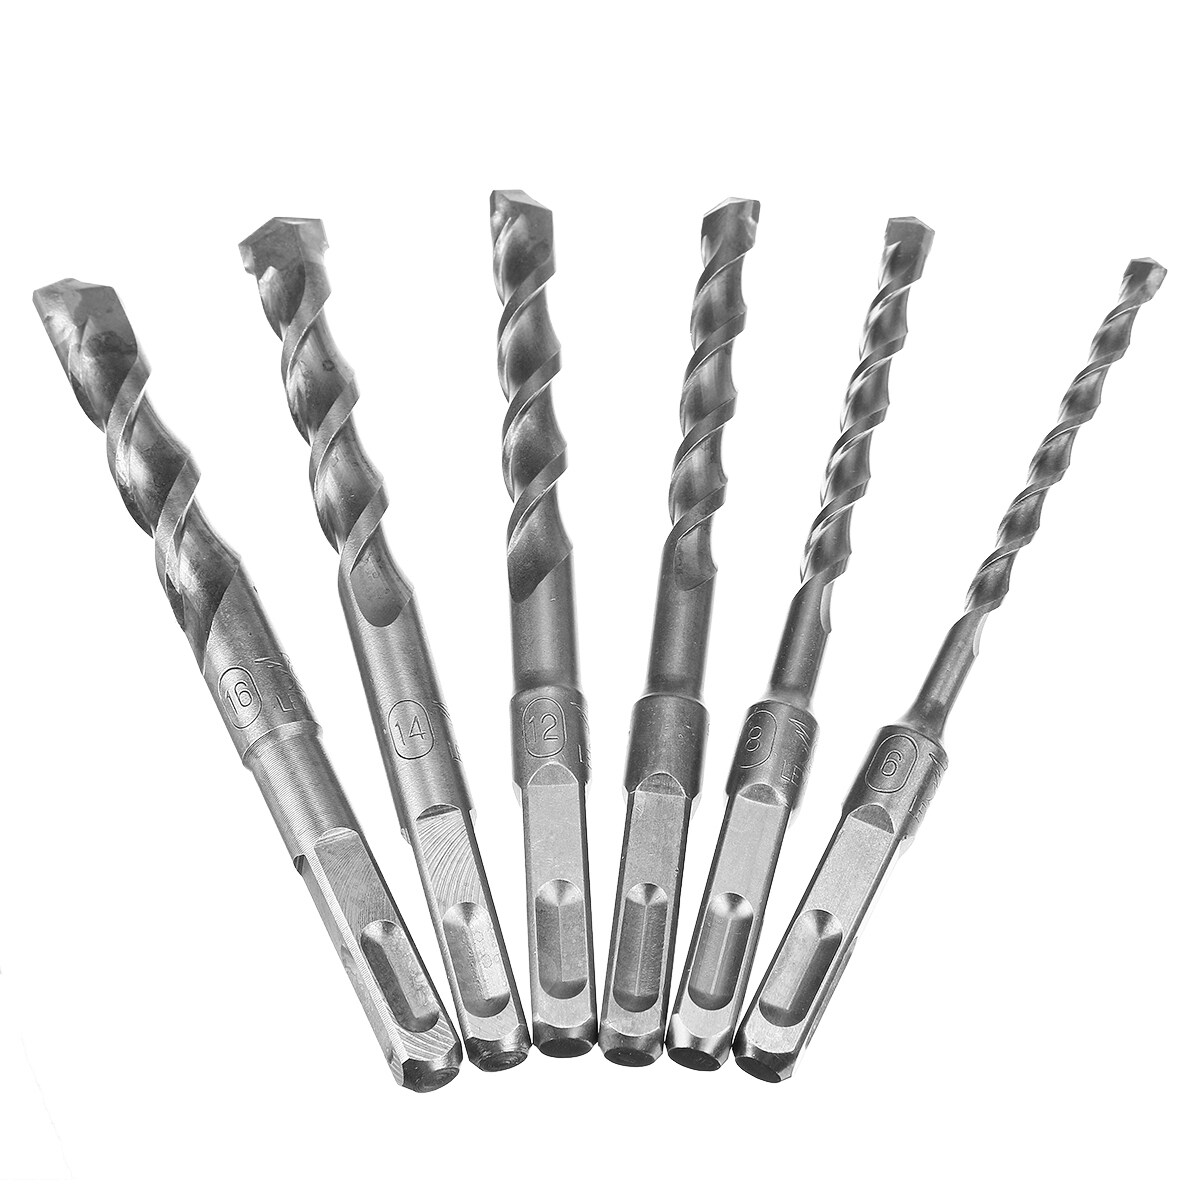 Electric  Drill Bit Chrome Alloy Steel Compatible With All SDS-plus  \\cn @1 